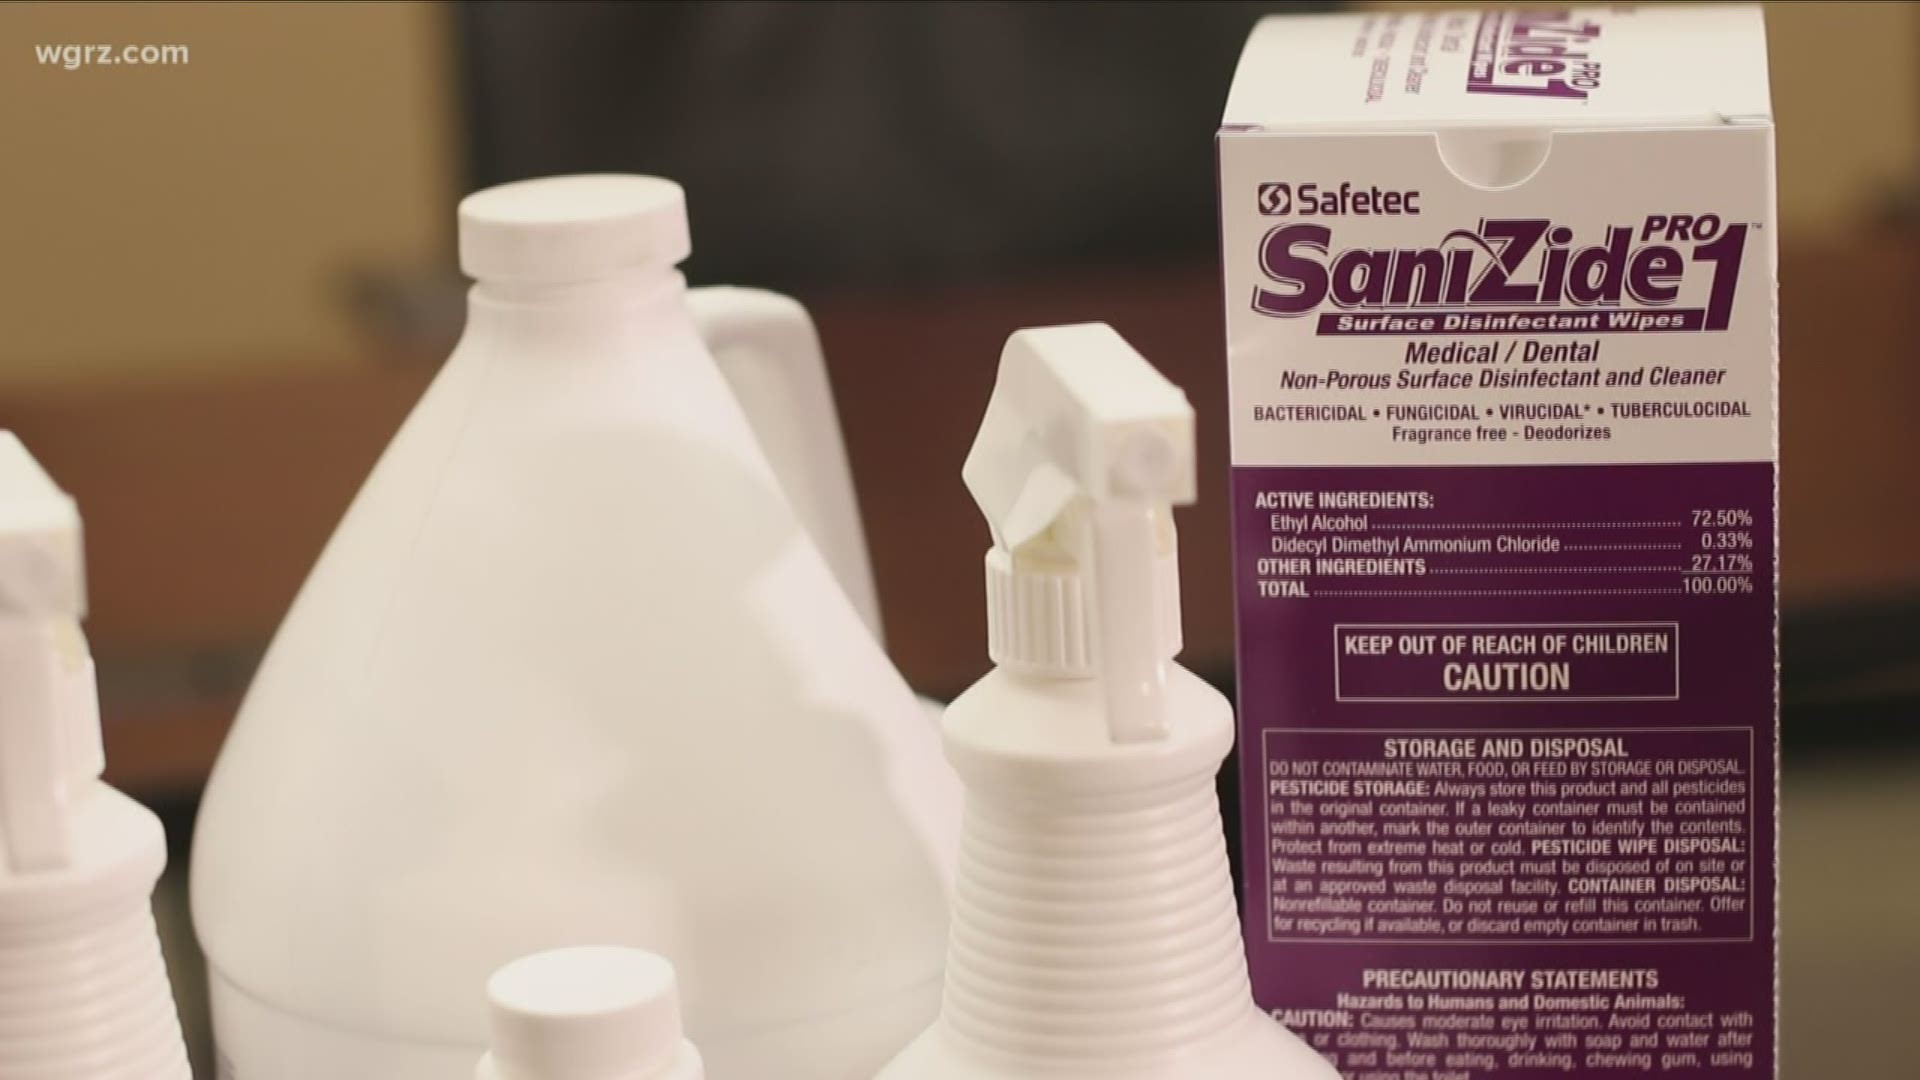 Safetec manufactures a product called sani-zide-pro-1 that is effective against the the covid 19 strain of coronavirus after only a minute.